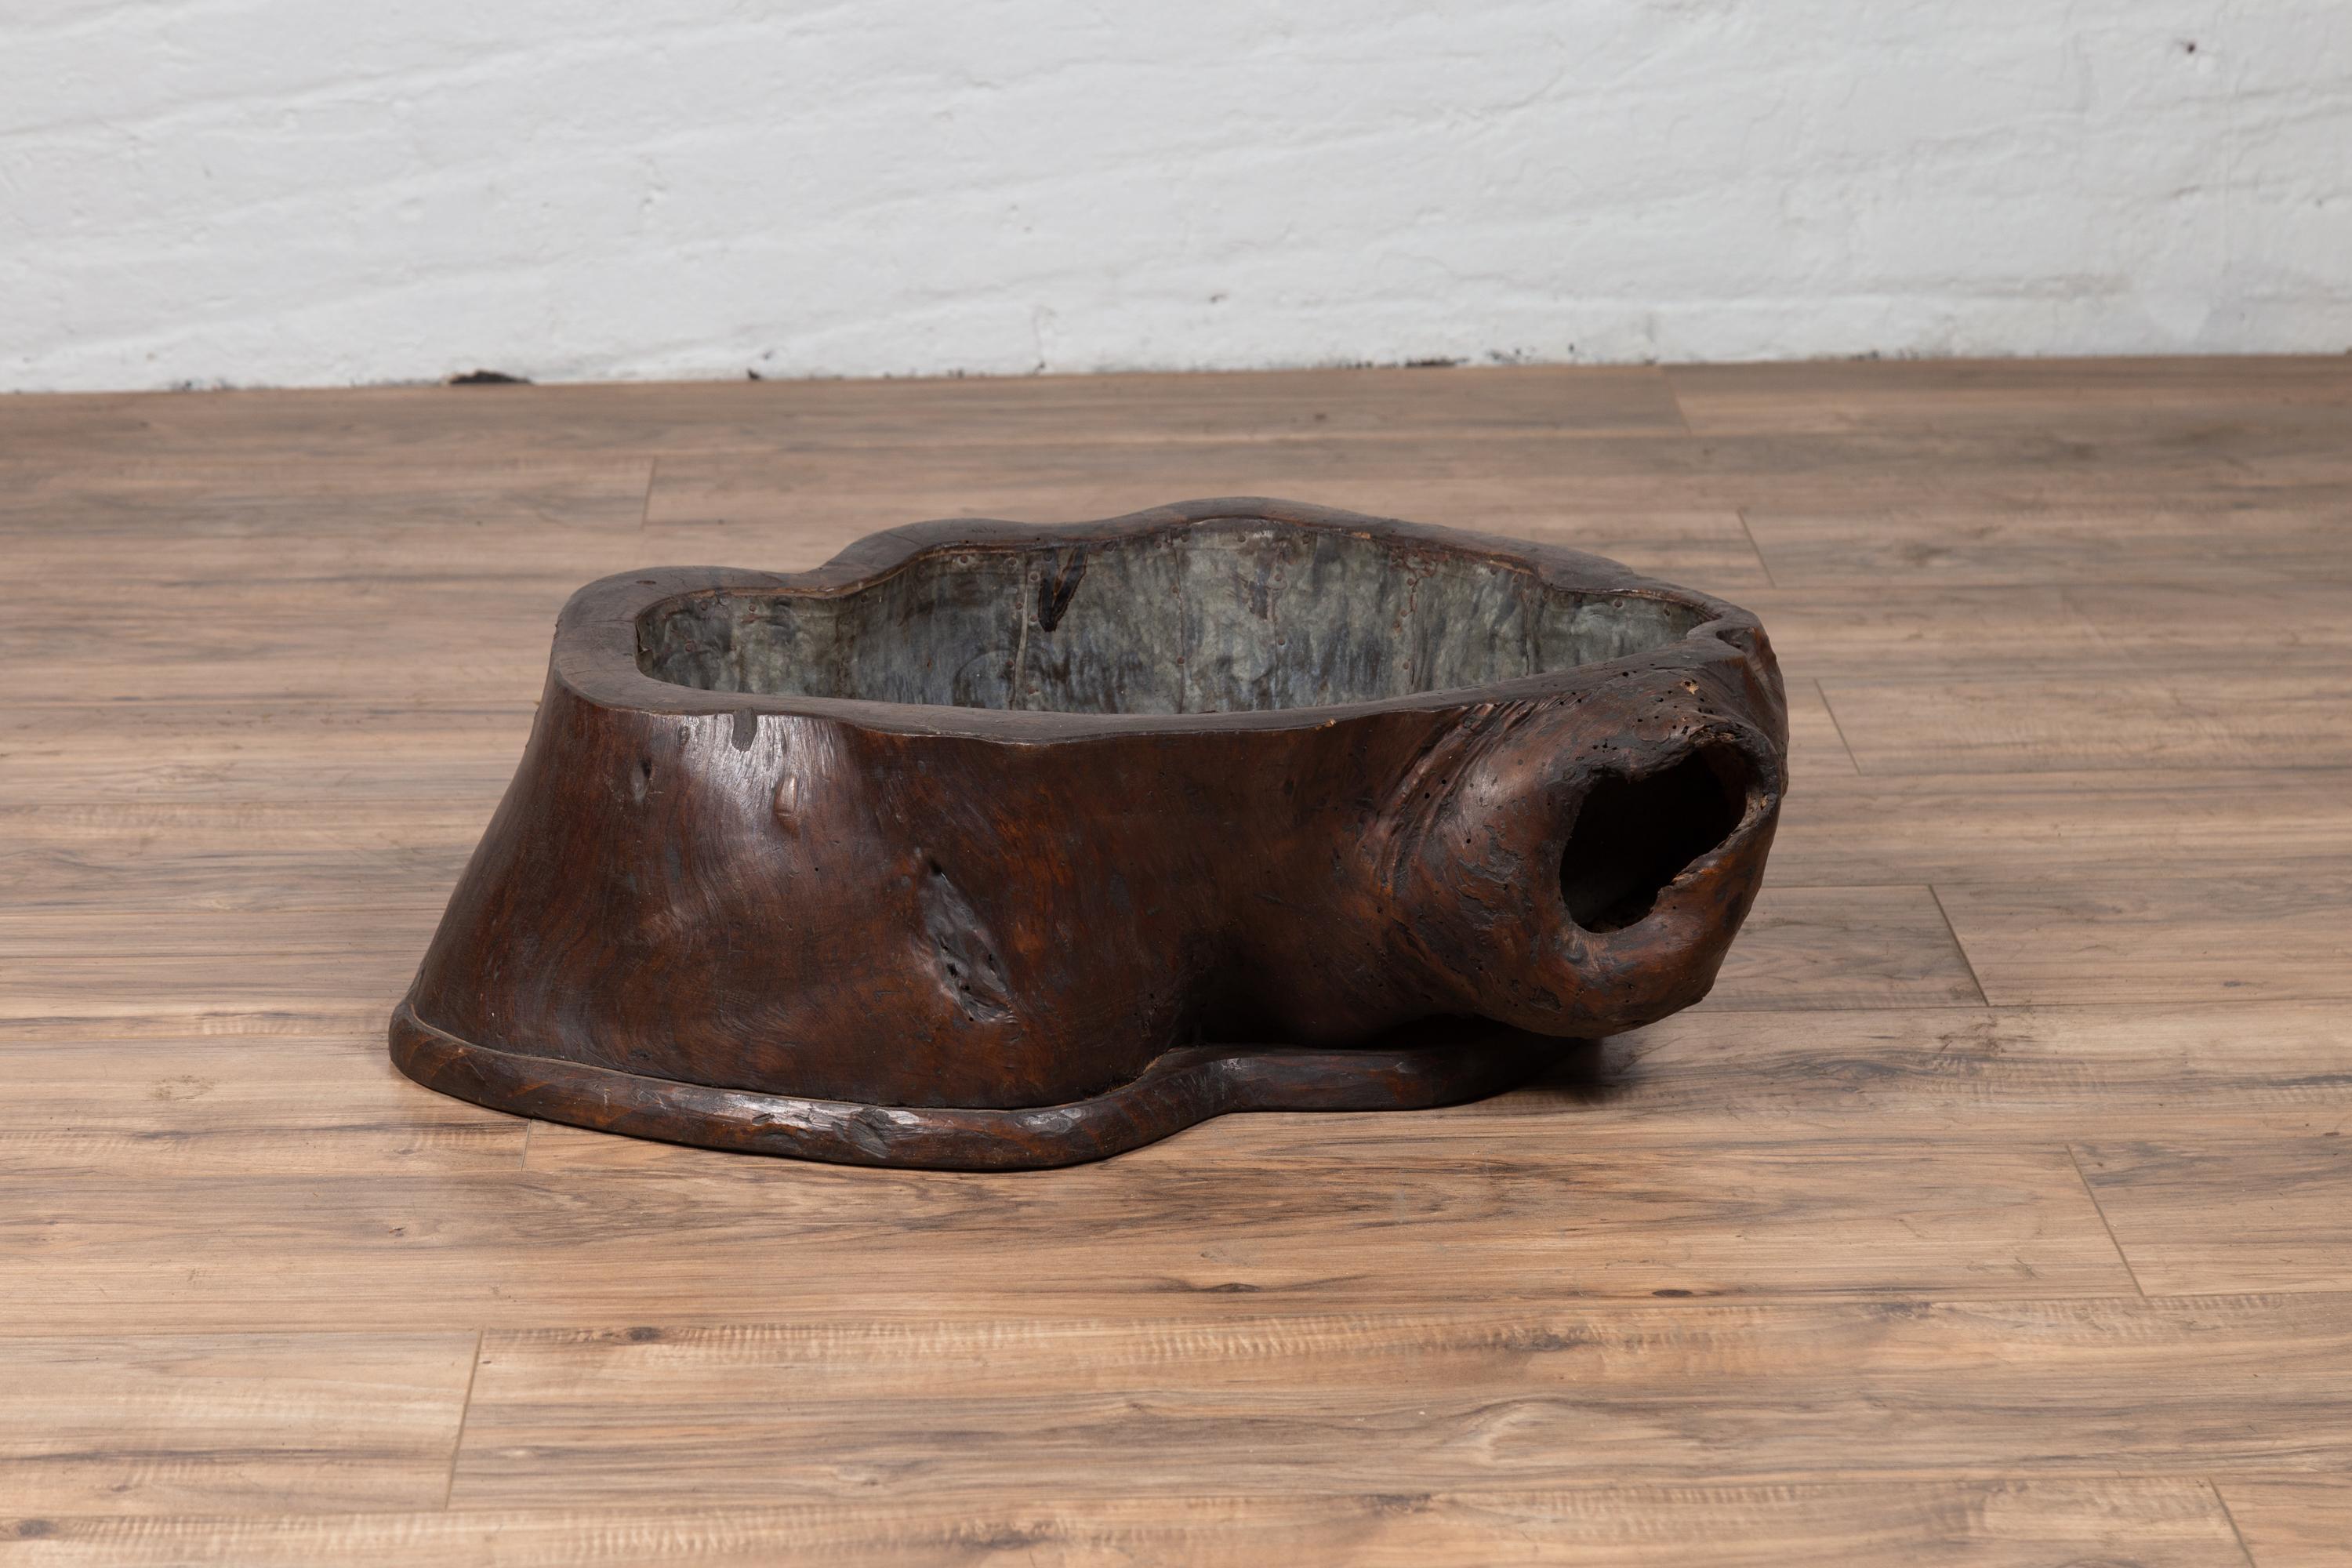 Rustic Antique Japanese Hibachi circa 1900 Made from a Tree Root with Brown Patina